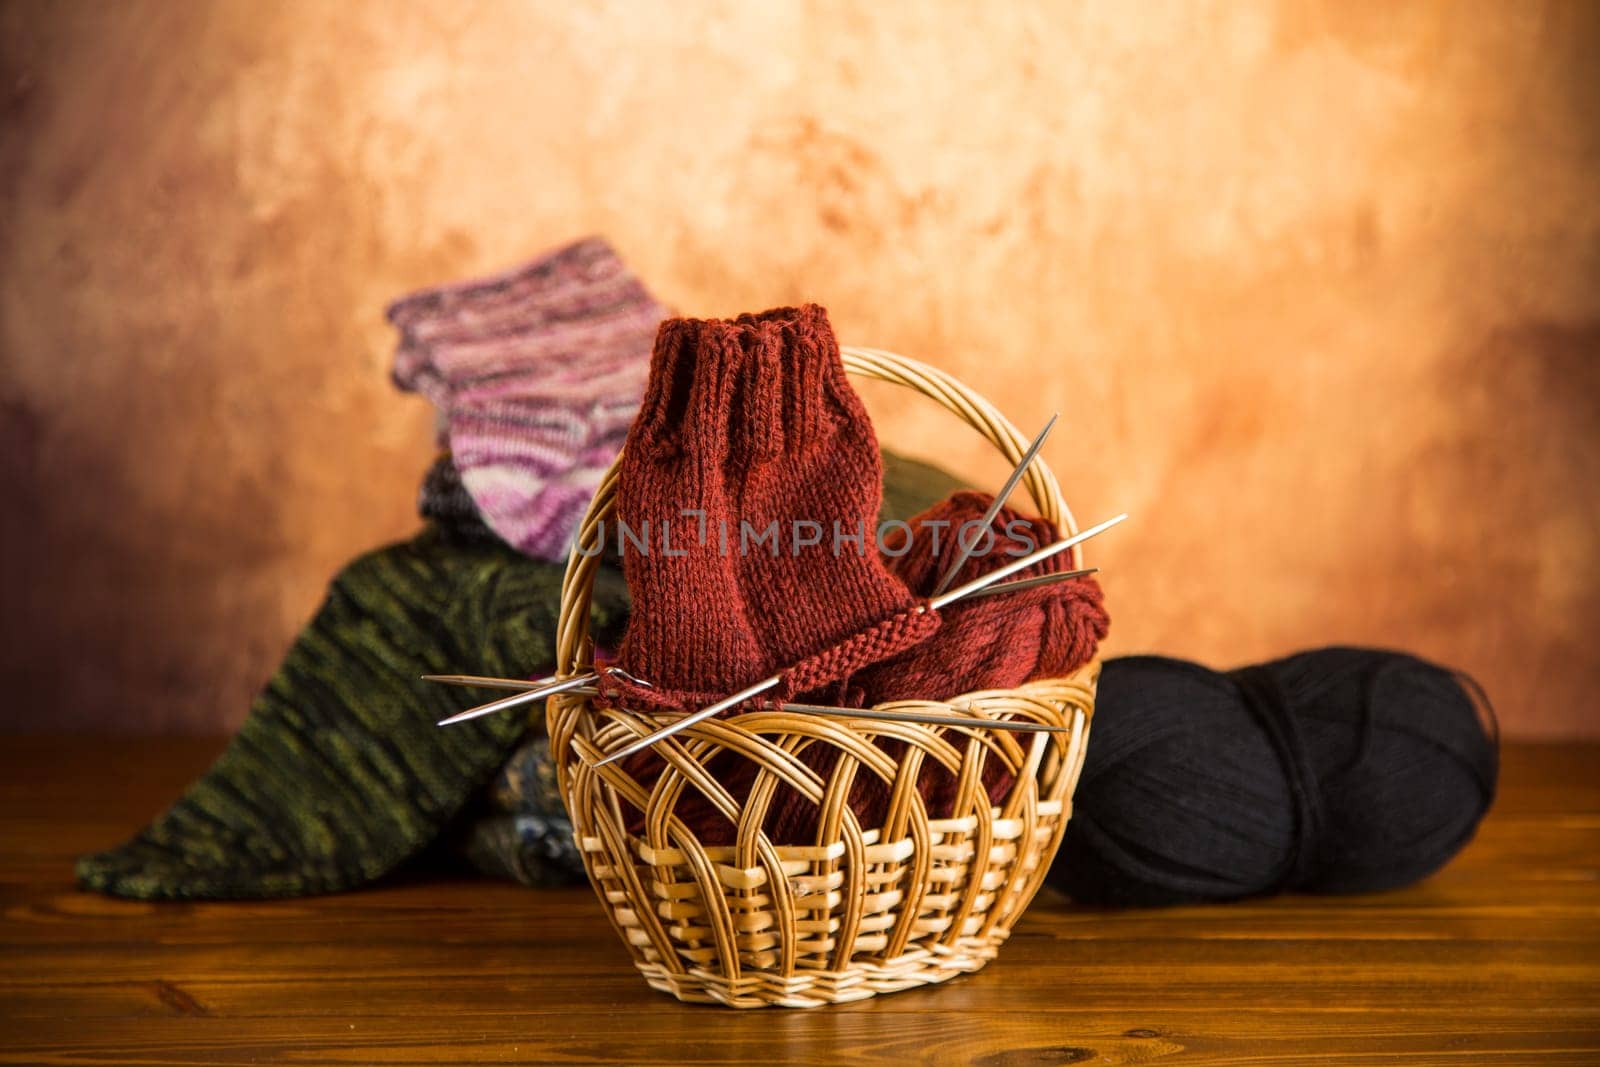 Colored yarn, knitting needles and other items for hand knitting on a dark wooden table.